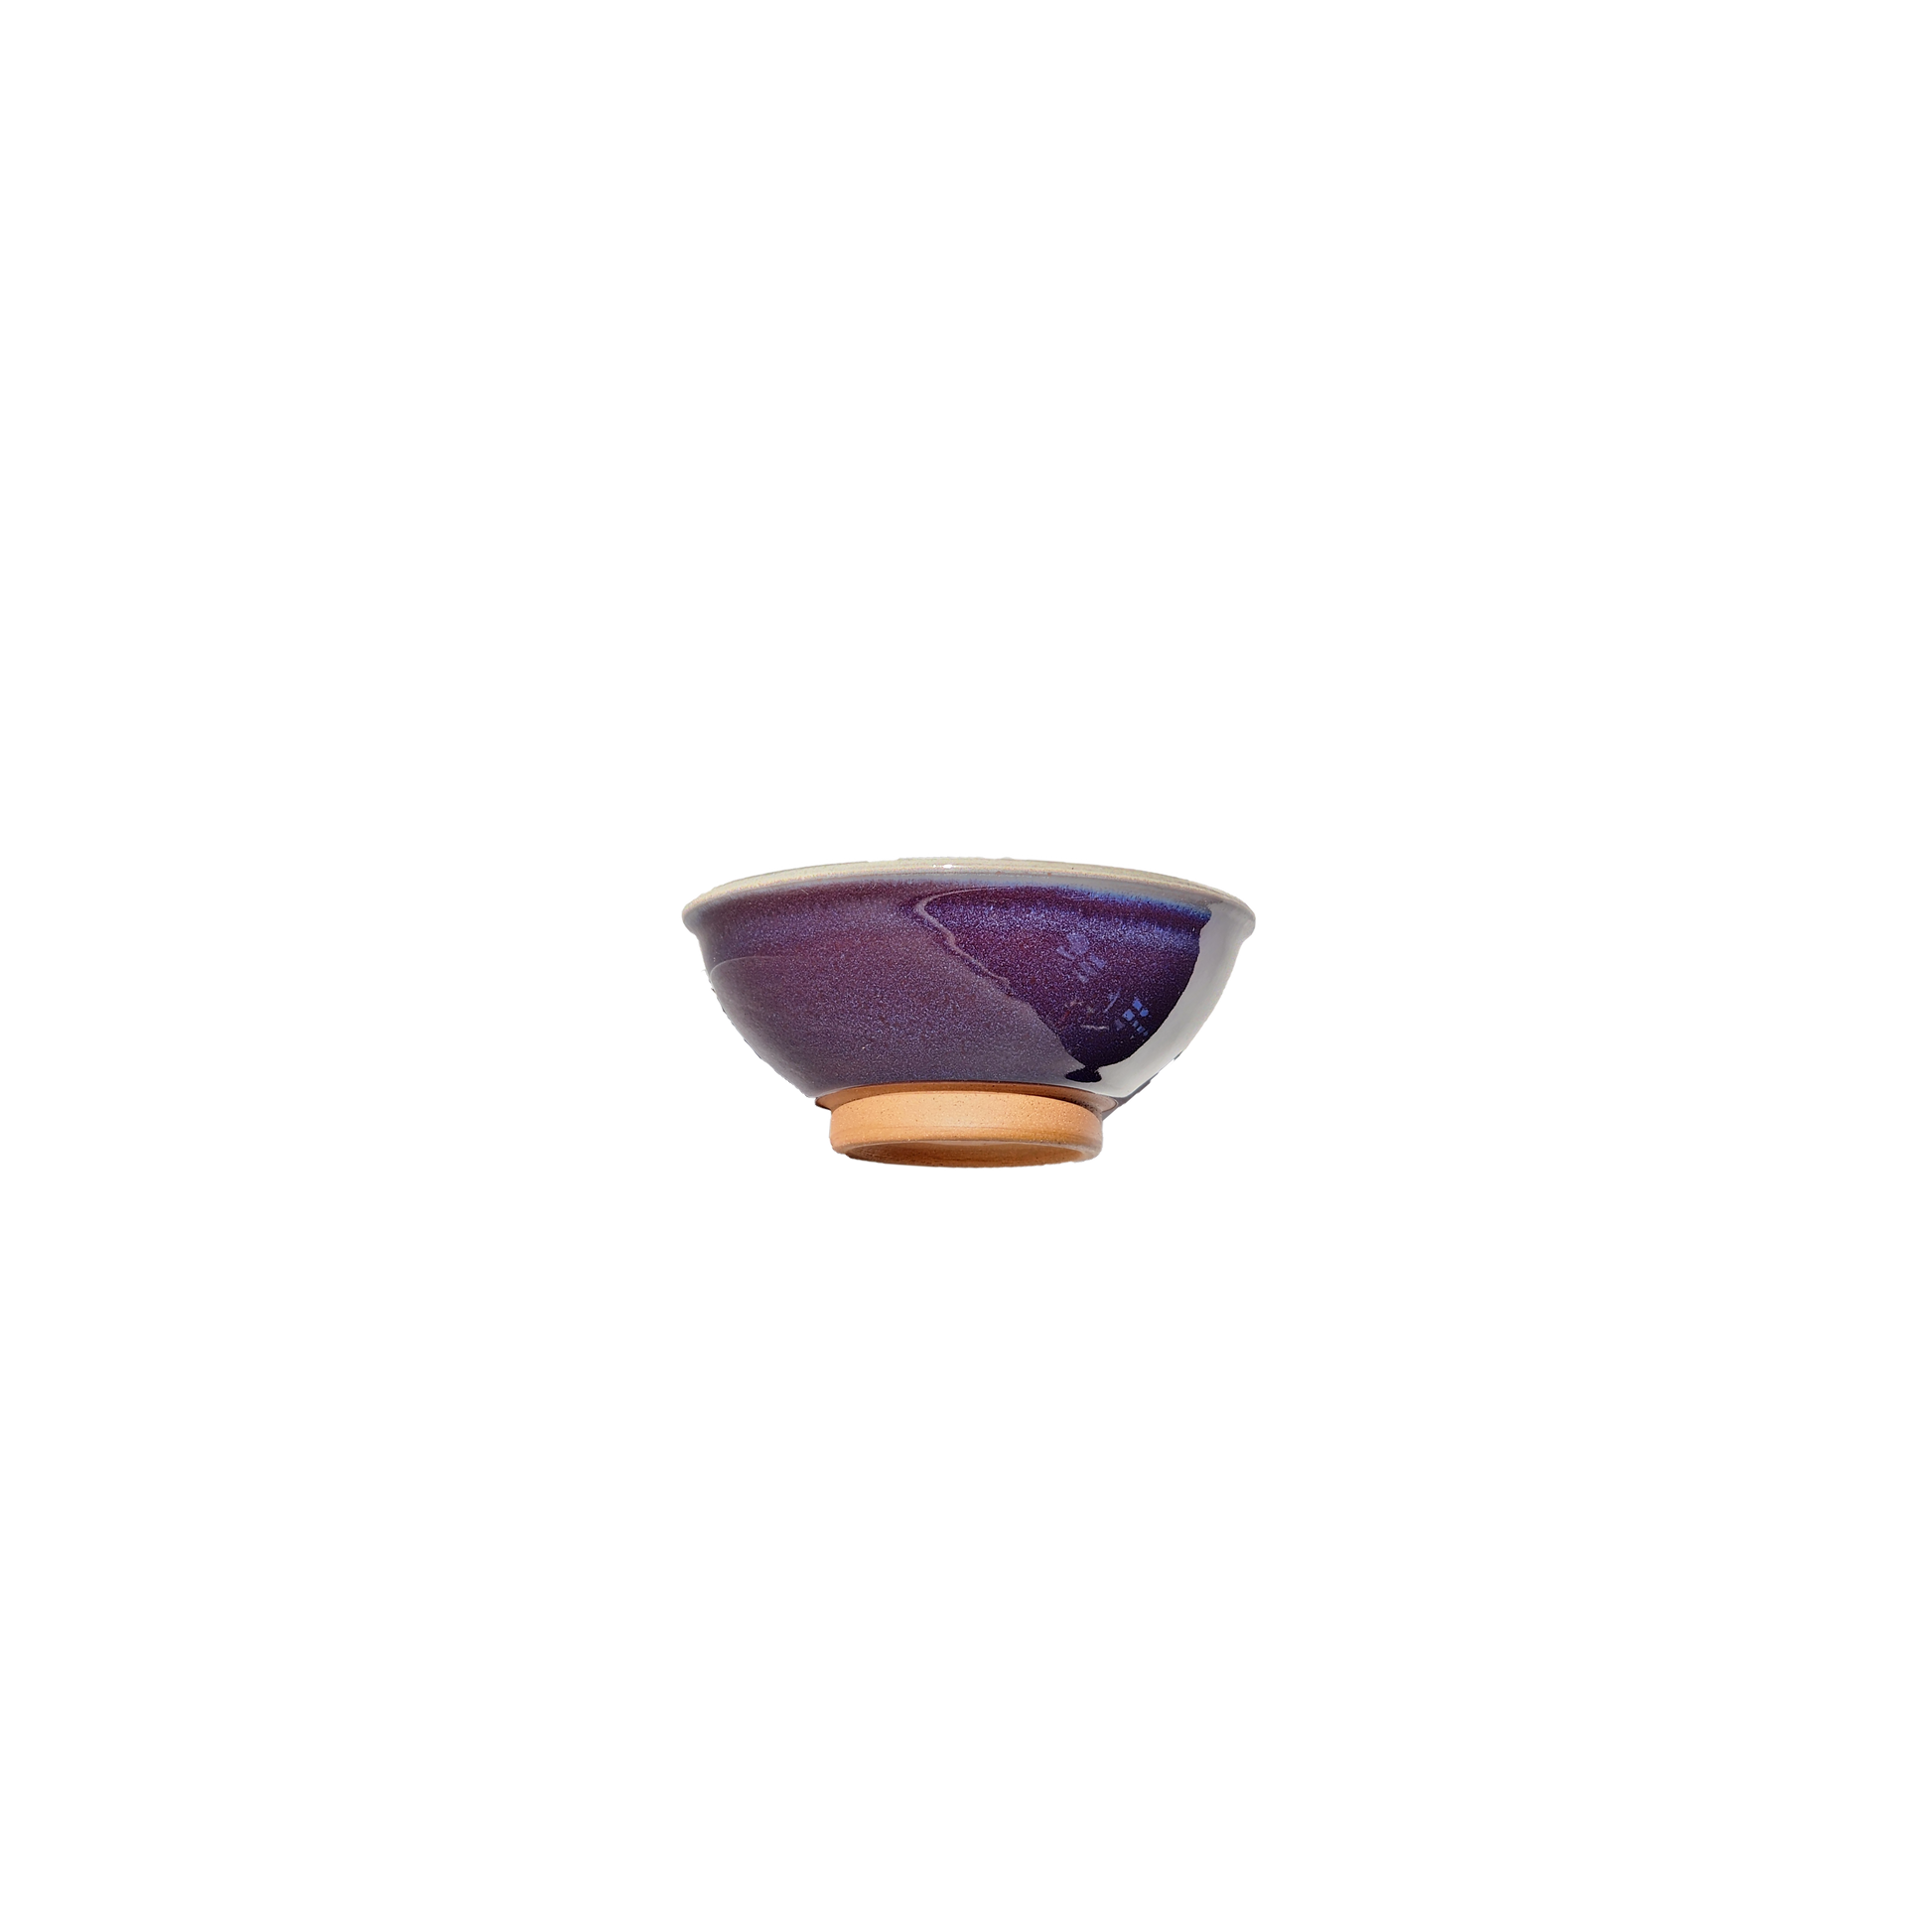 Image: Infuse your table with regal charm using this purple sugar bowl, adding a touch of sophistication to your tea or coffee service. Holds 4 ounces of sugar, ensuring your beverages are perfectly sweetened.